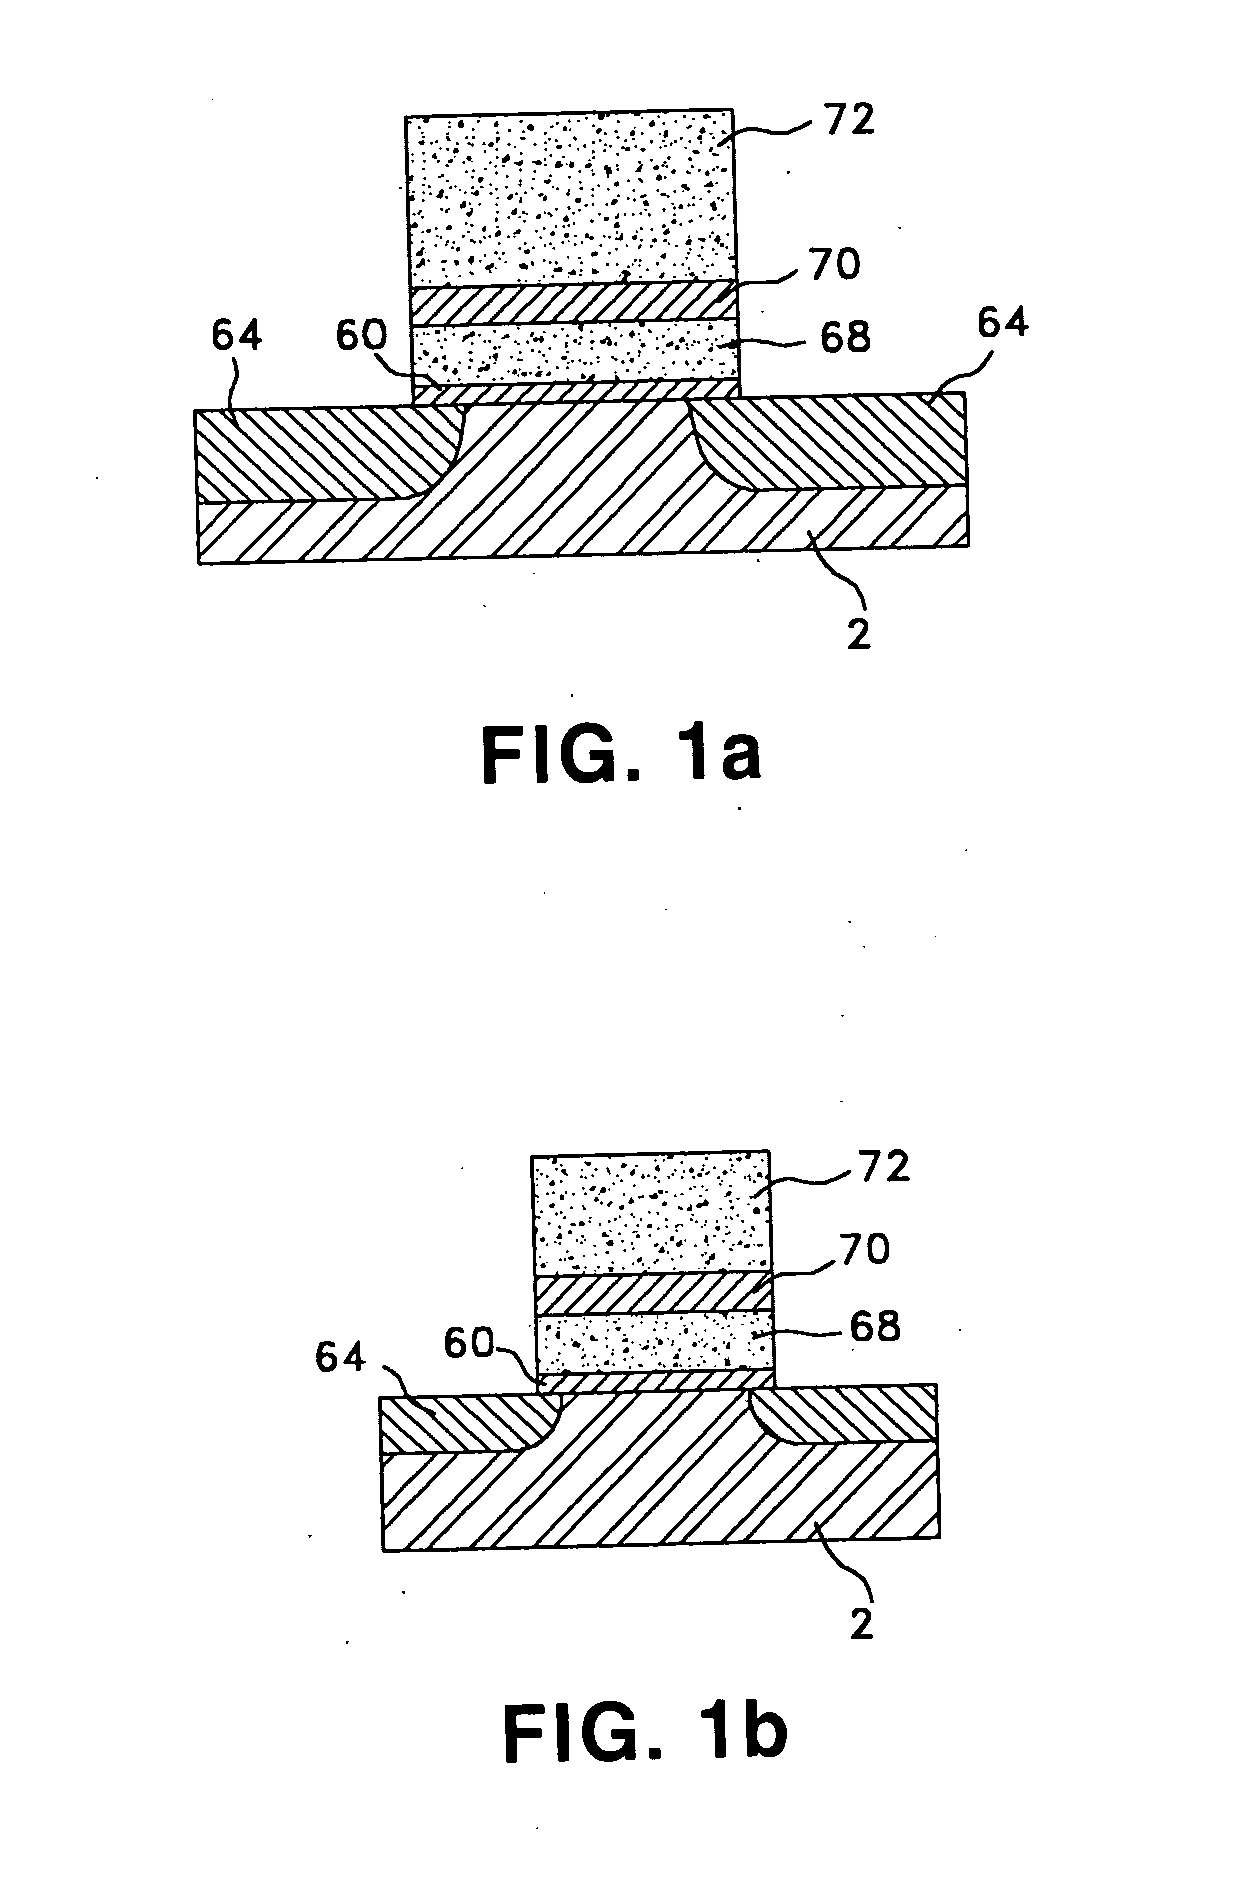 Double-gate flash memory device and fabrication method thereof